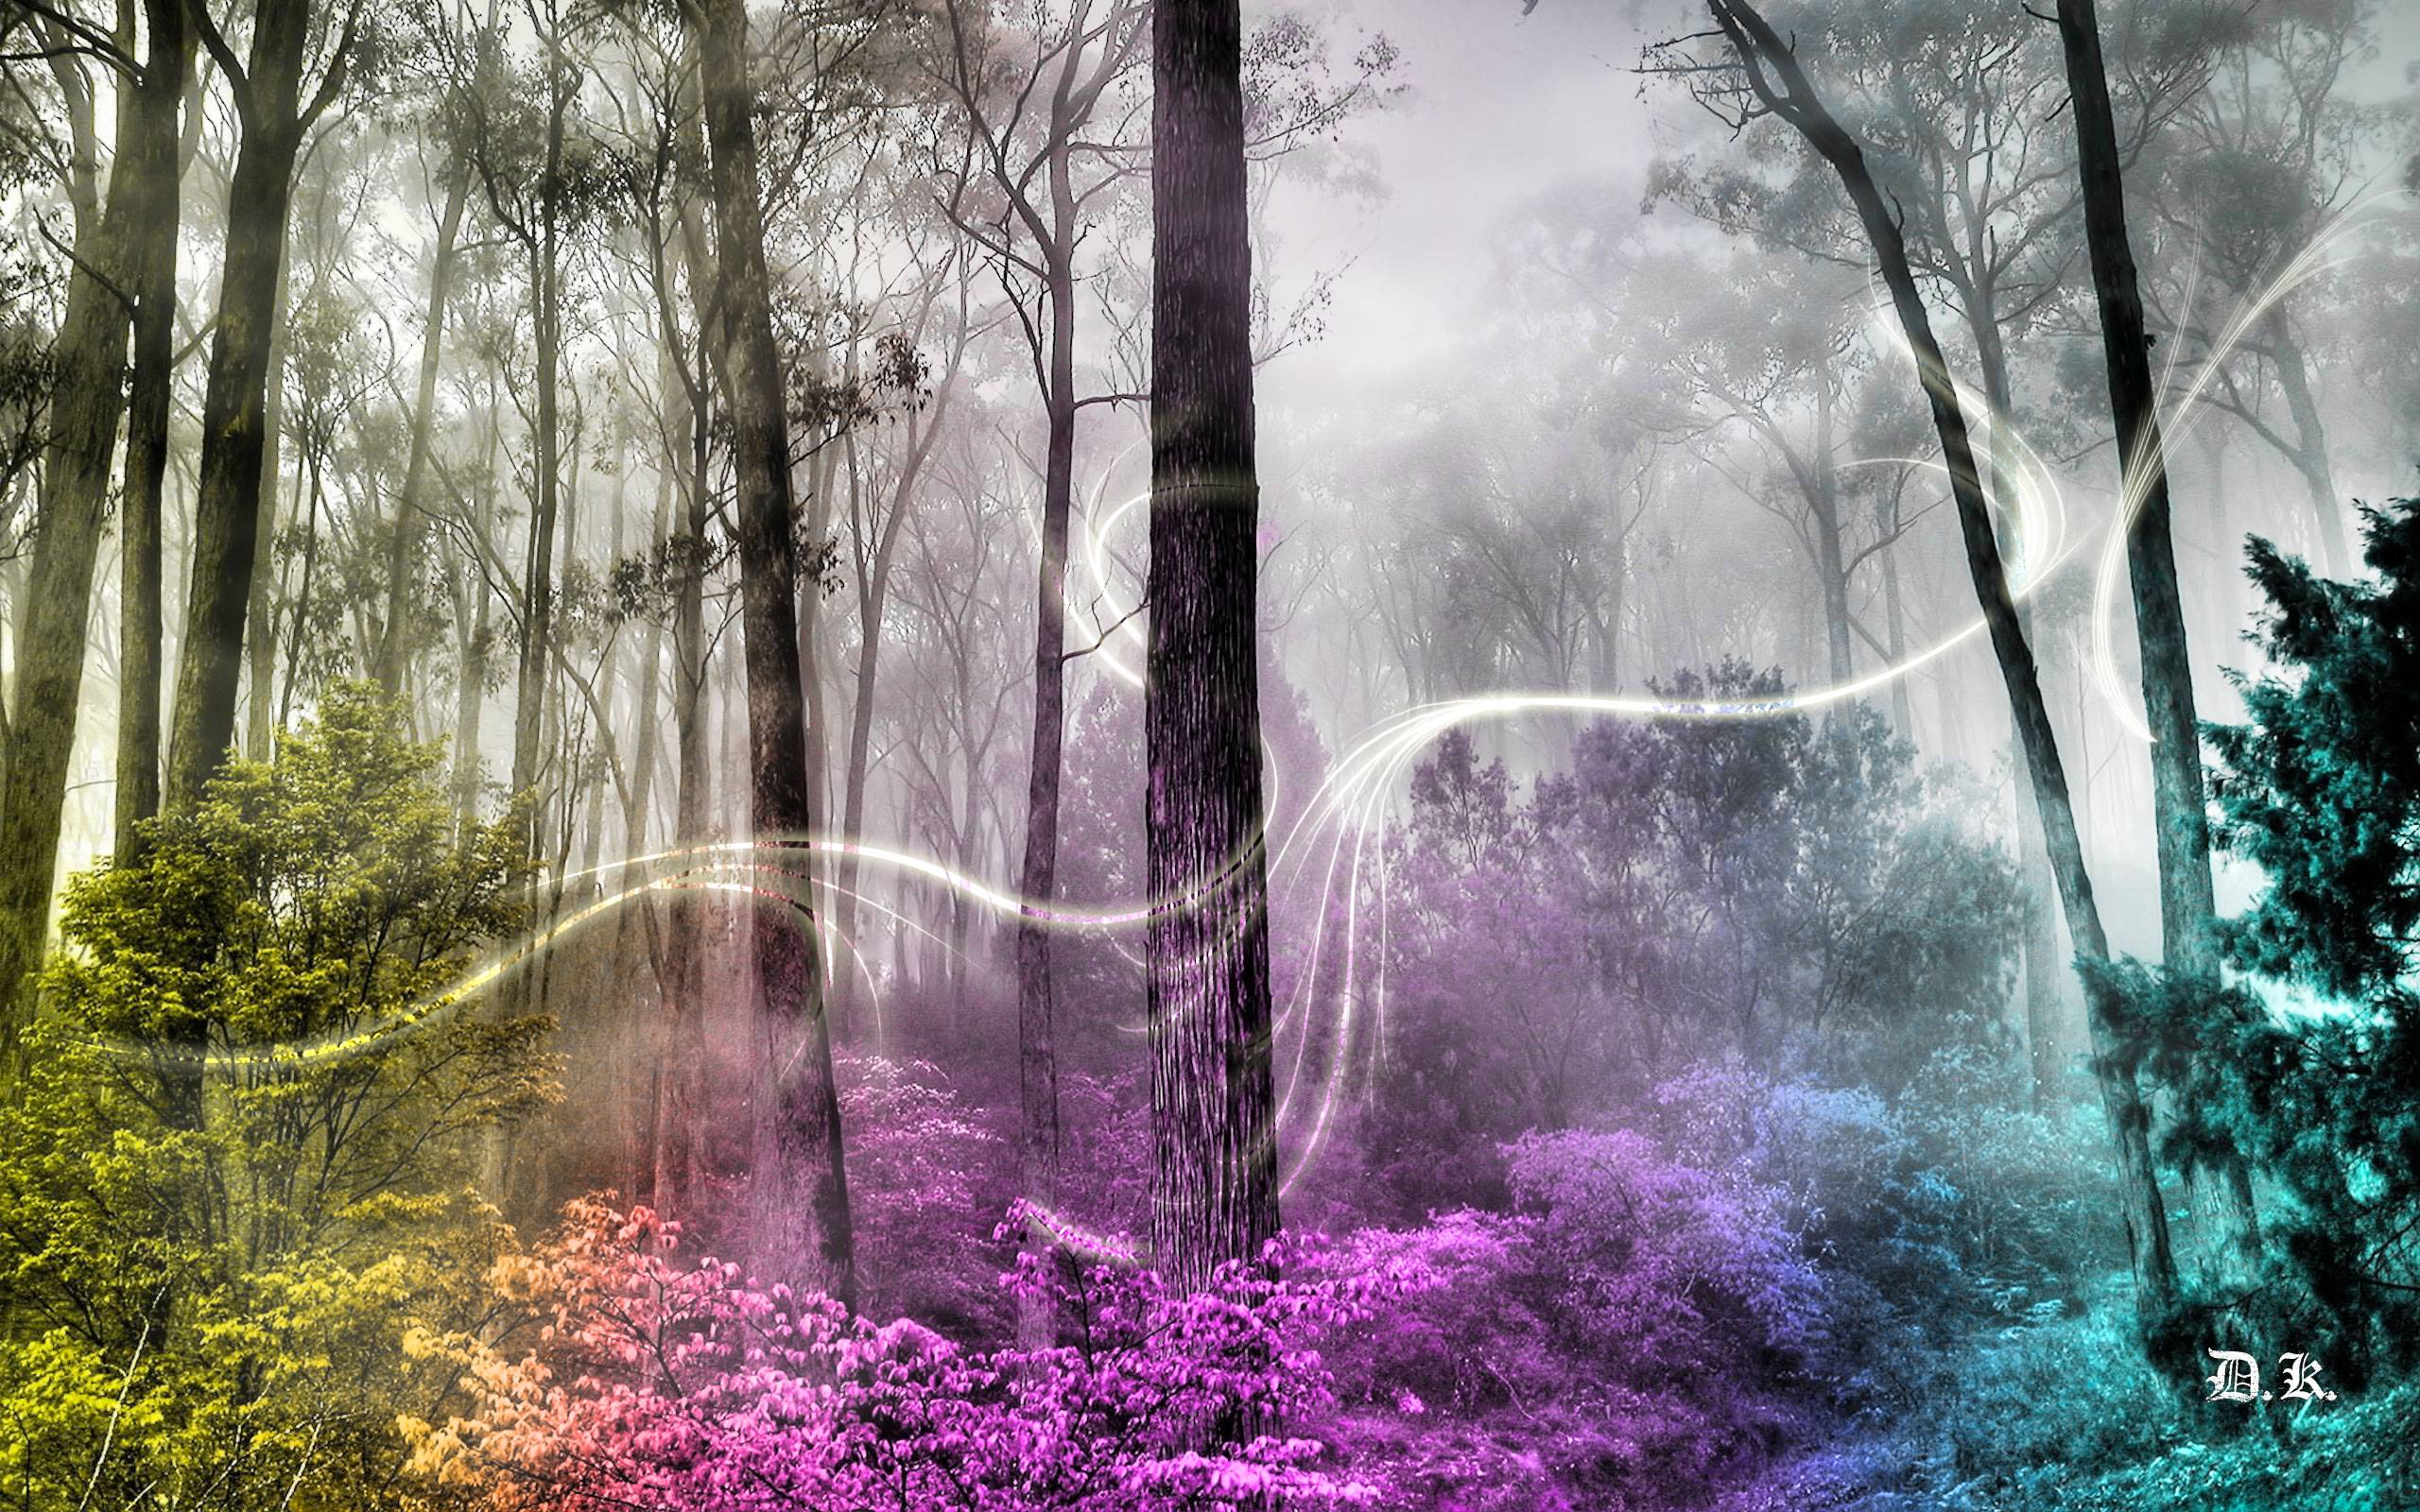 Enchanted Forest Wallpaper